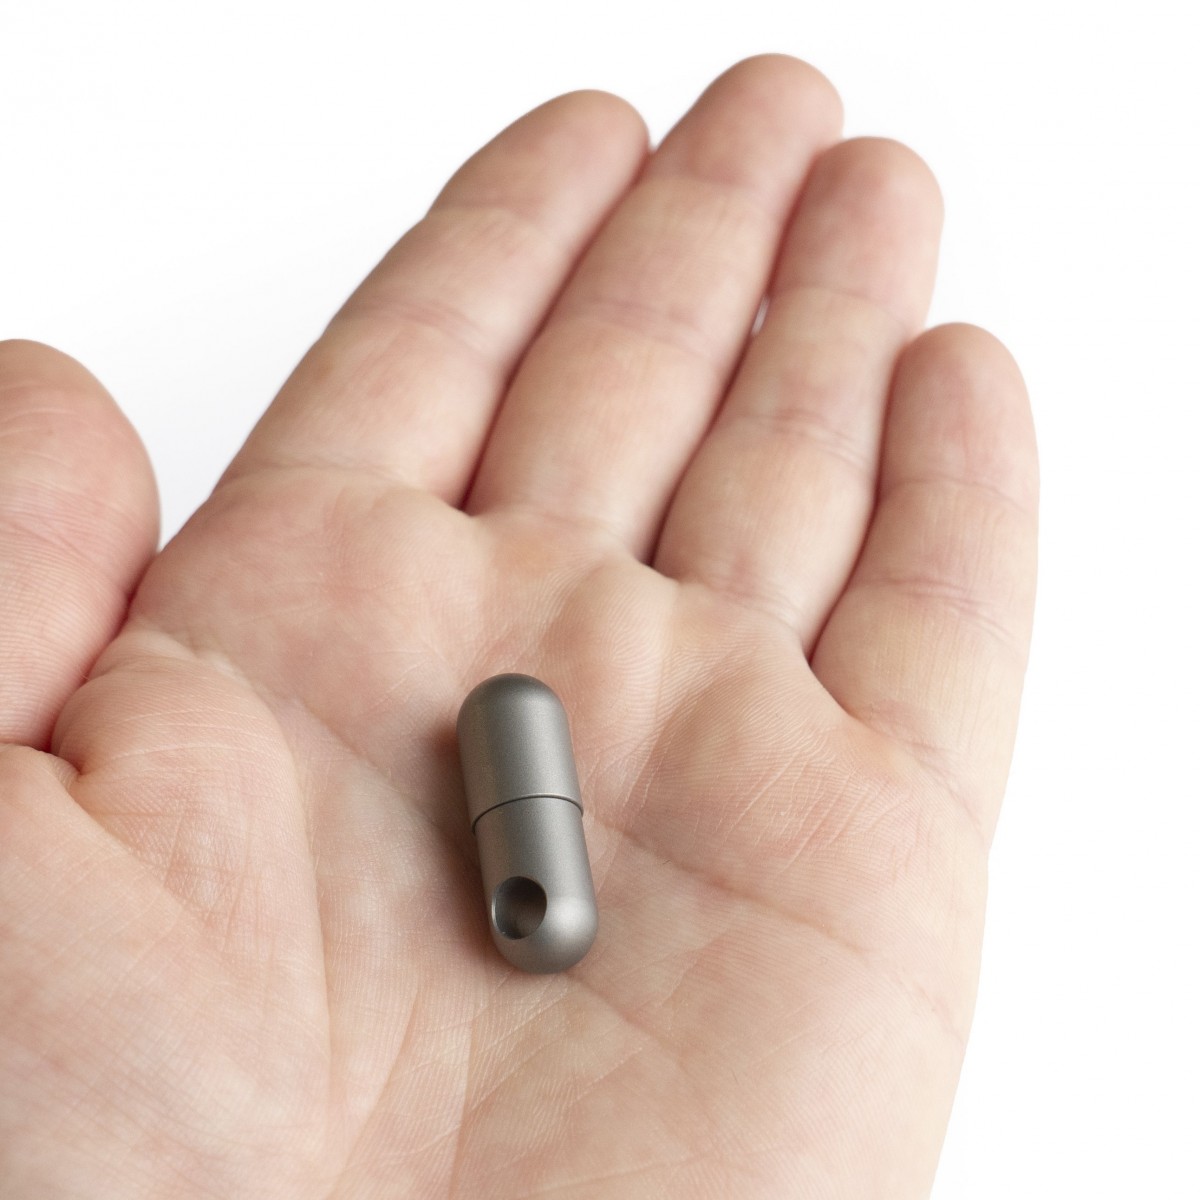 MICROBLADE PILL- everyday carry blade in a tiny capsule – MICROCARRY™